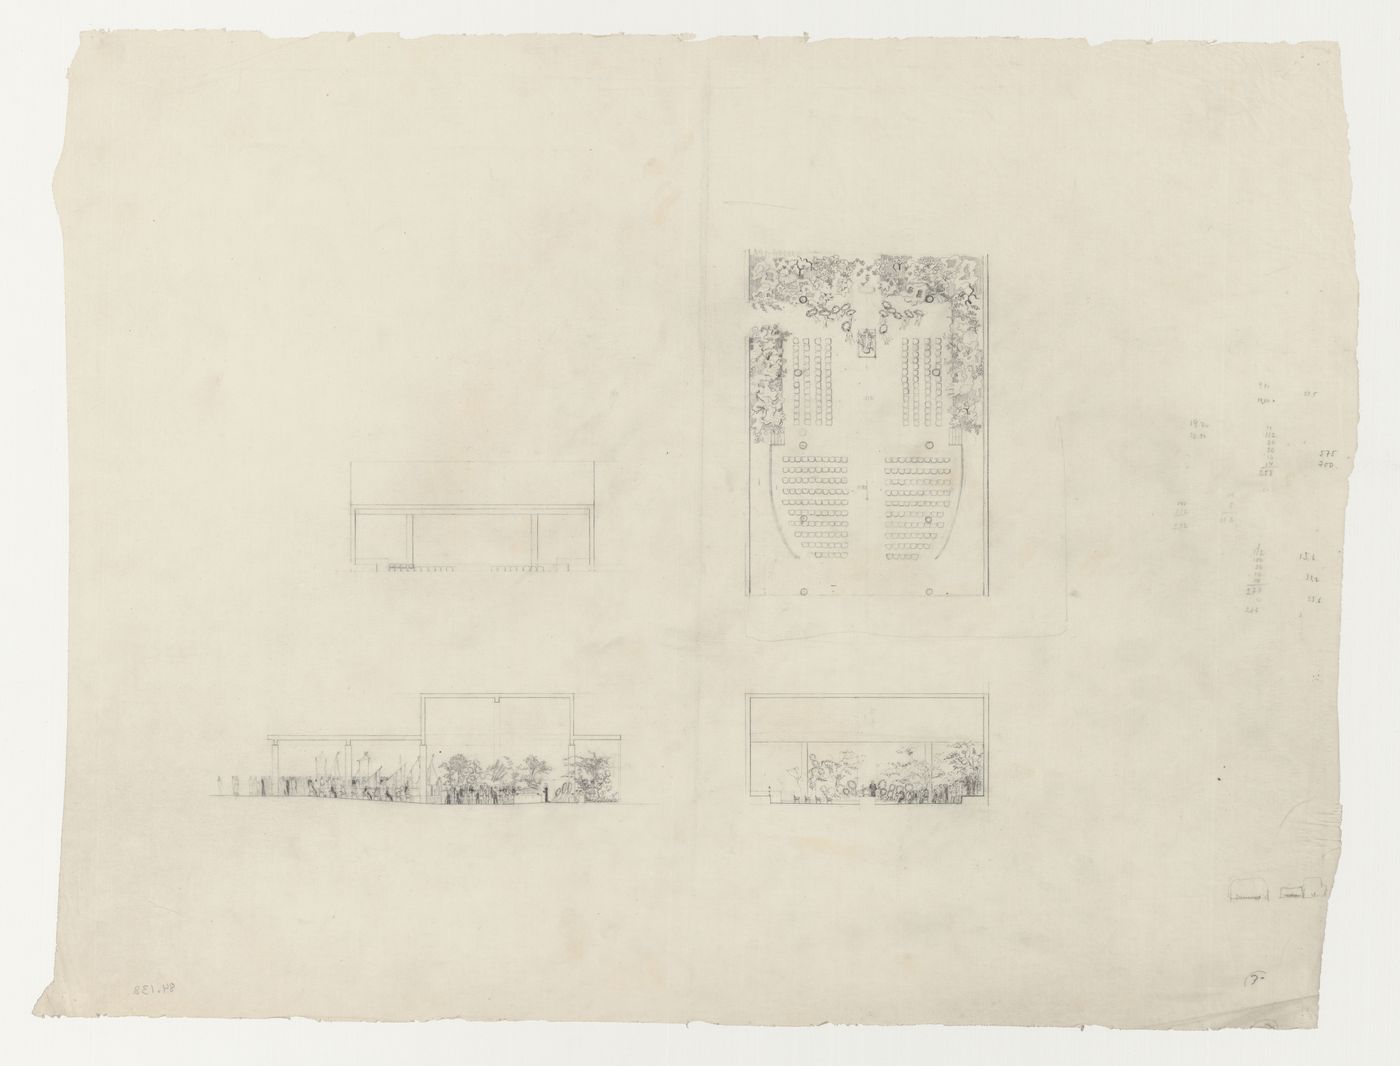 Plan and sections for the Chapel of the Holy Cross showing a service underway, Woodland Crematorium, Woodland Cemetery, Stockholm, Sweden